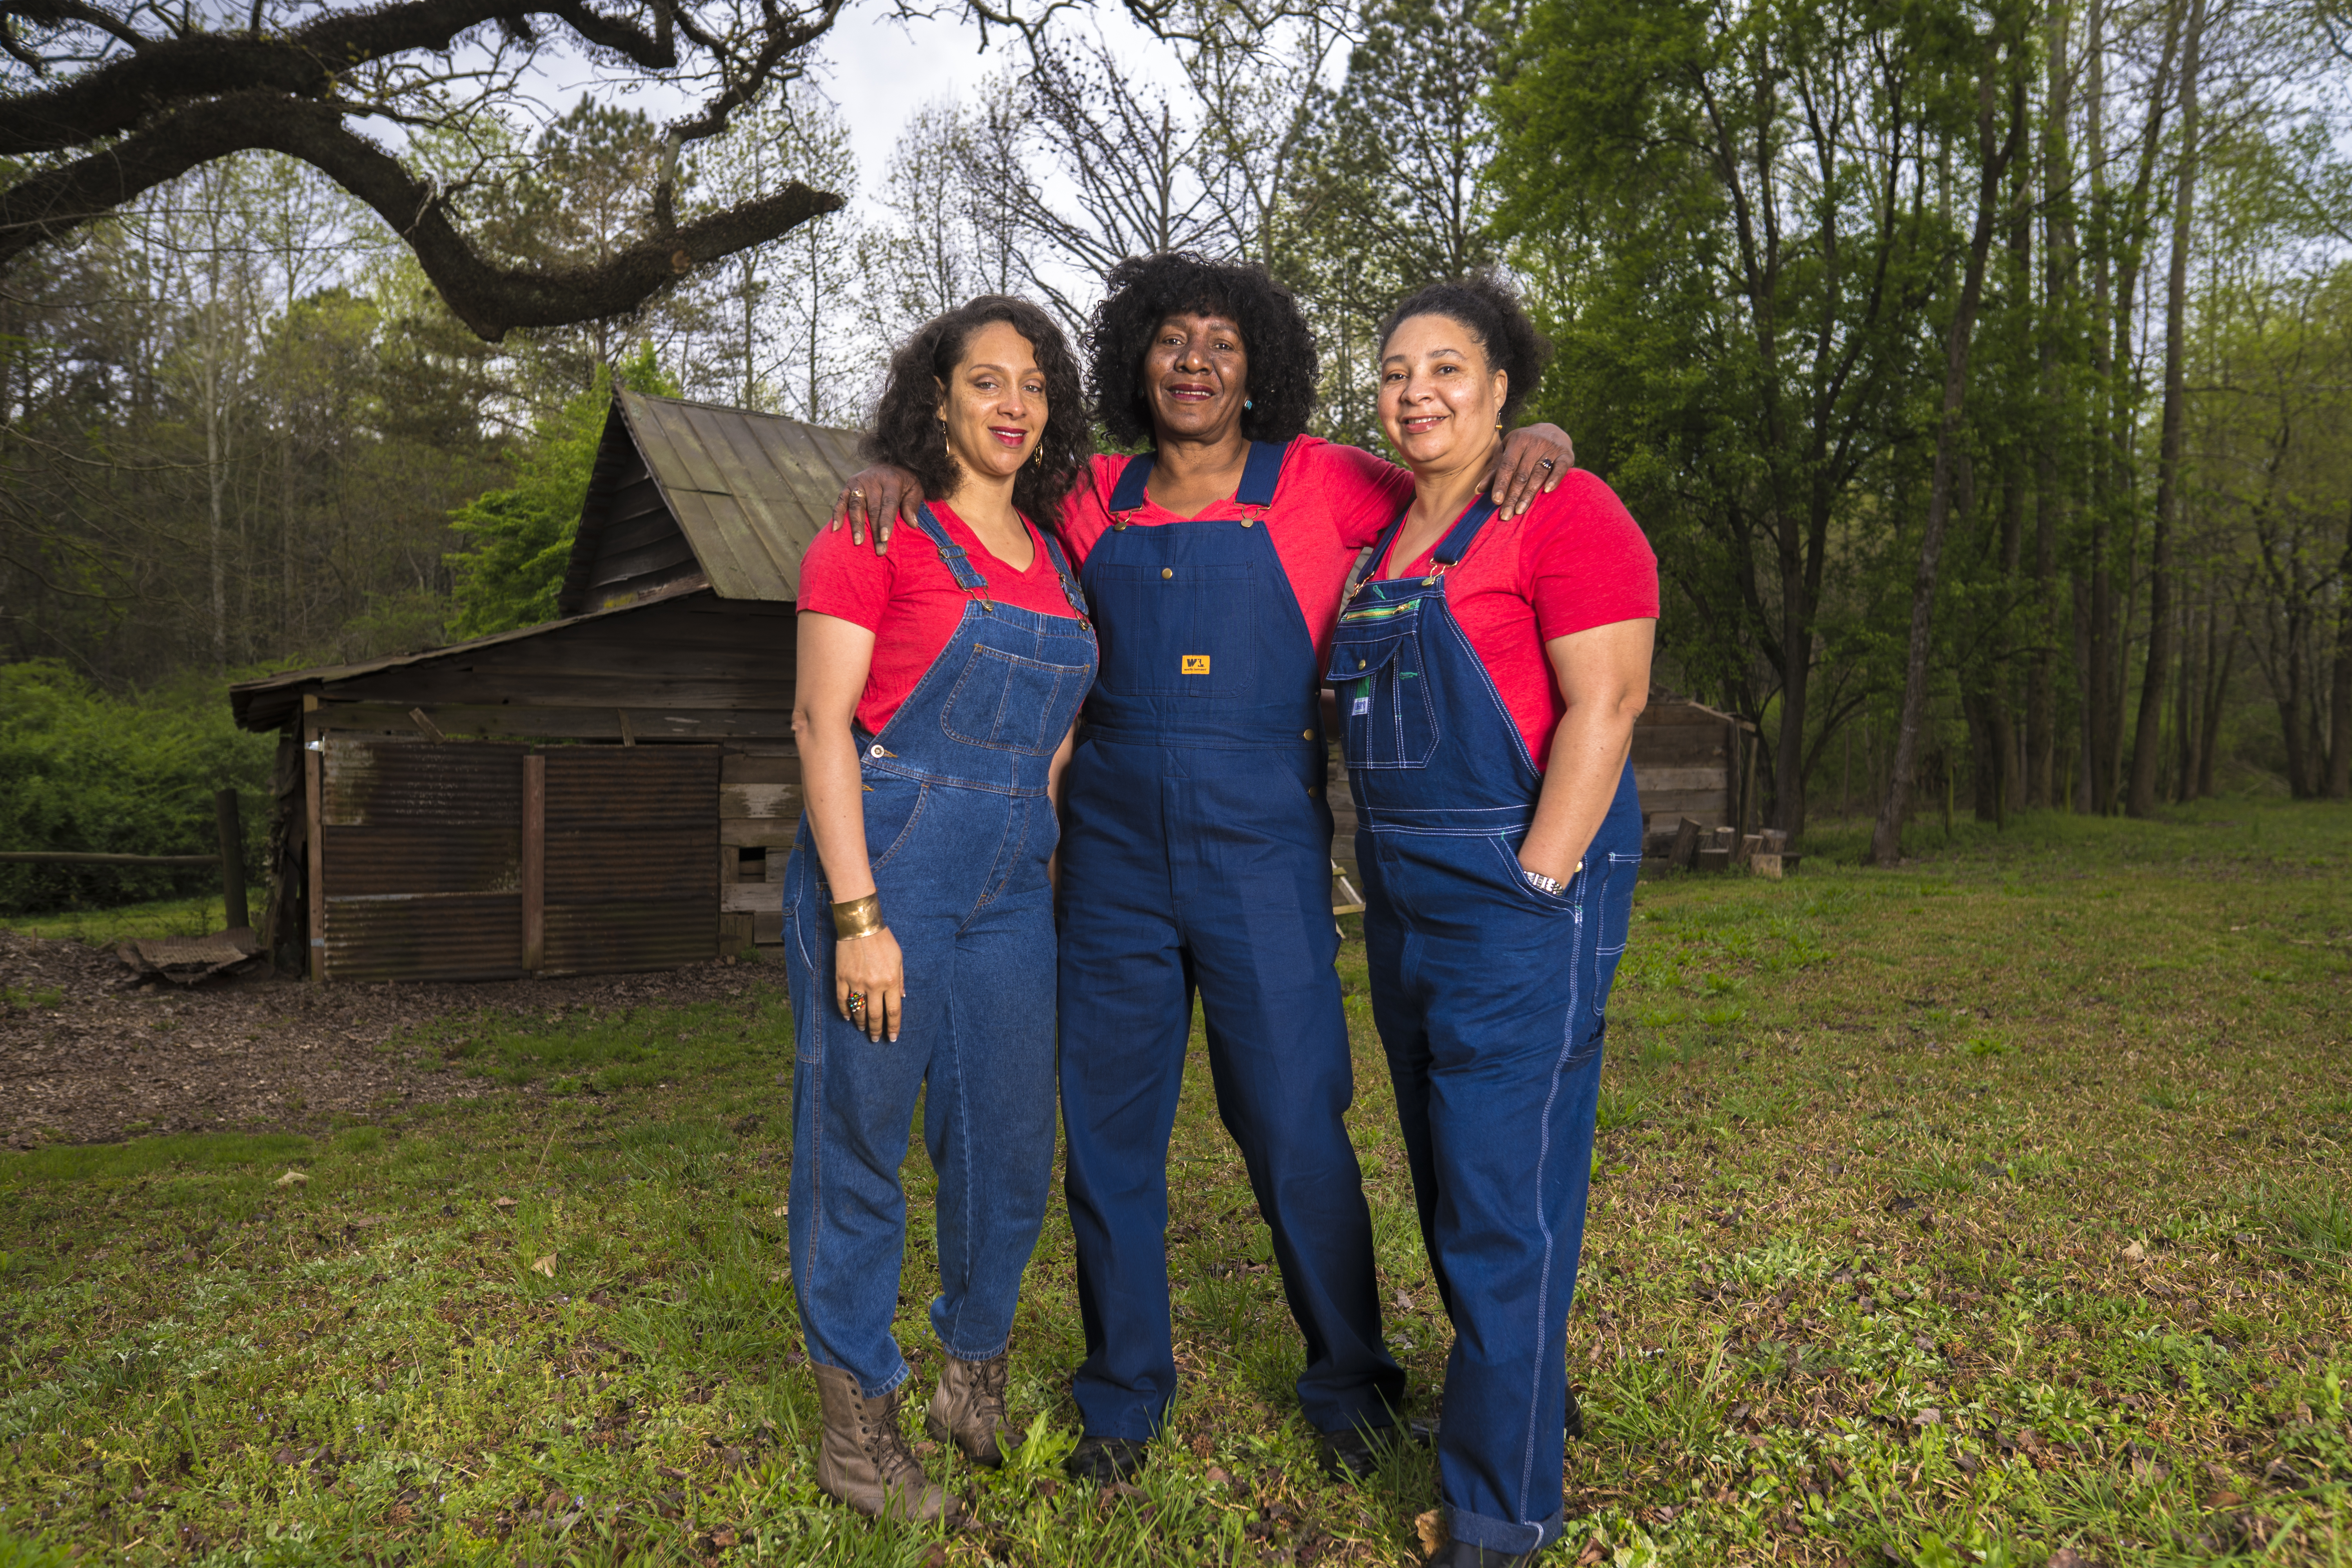 Black Farmers' Network | Dr. Veronica Womack | All-female farming family unearths 1920s textile goldmine